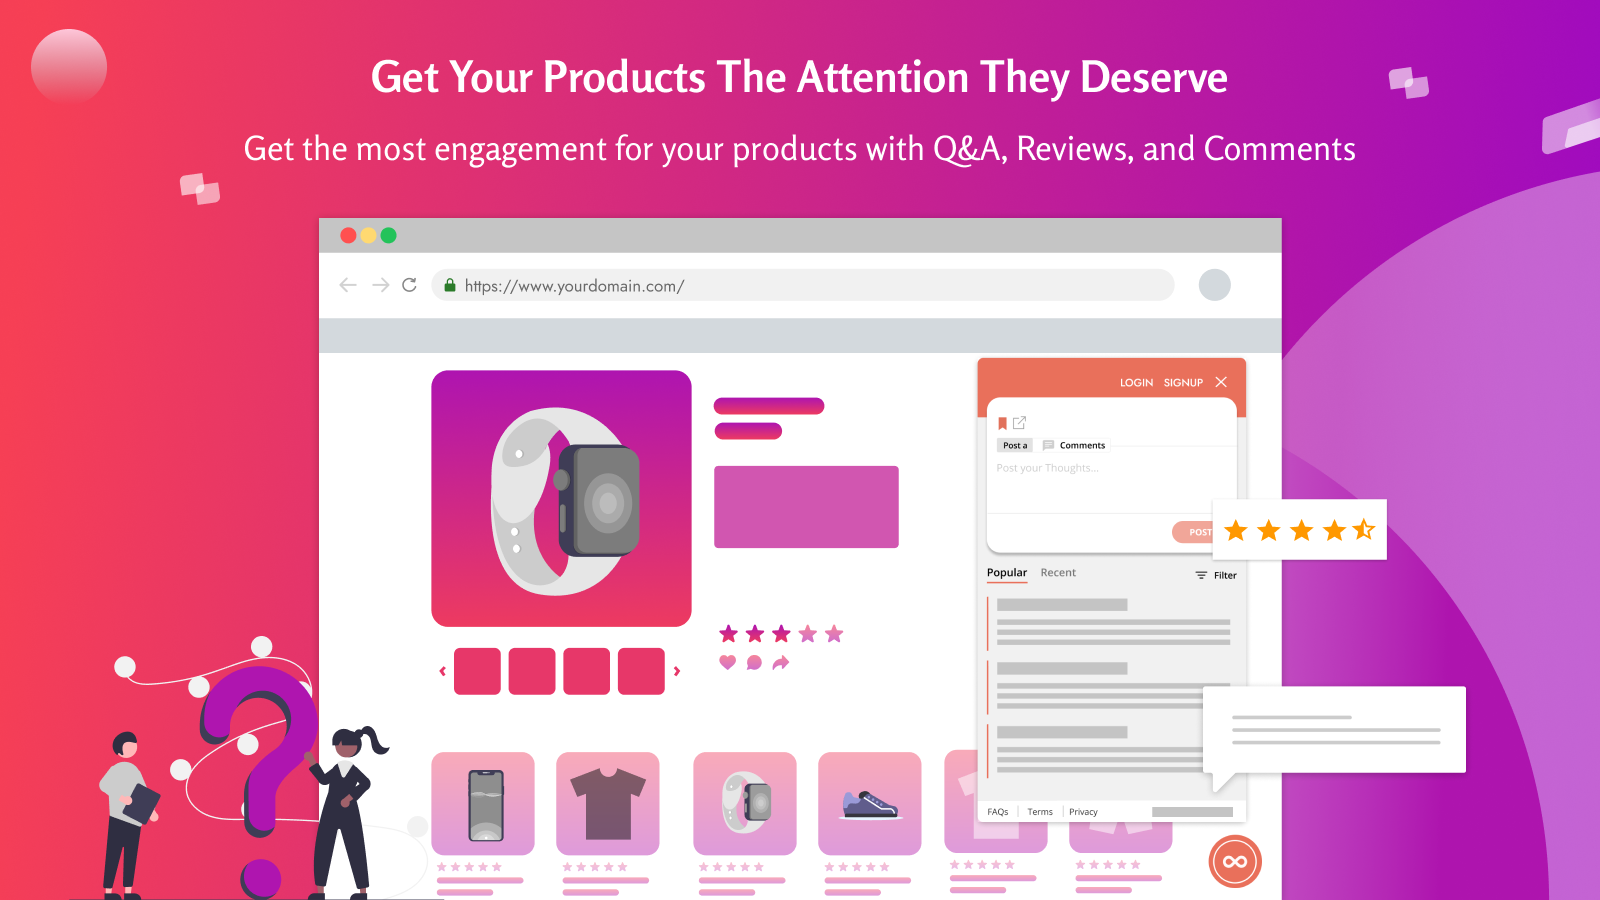 Zeeker increases visibility to products with Q&A and Reviews